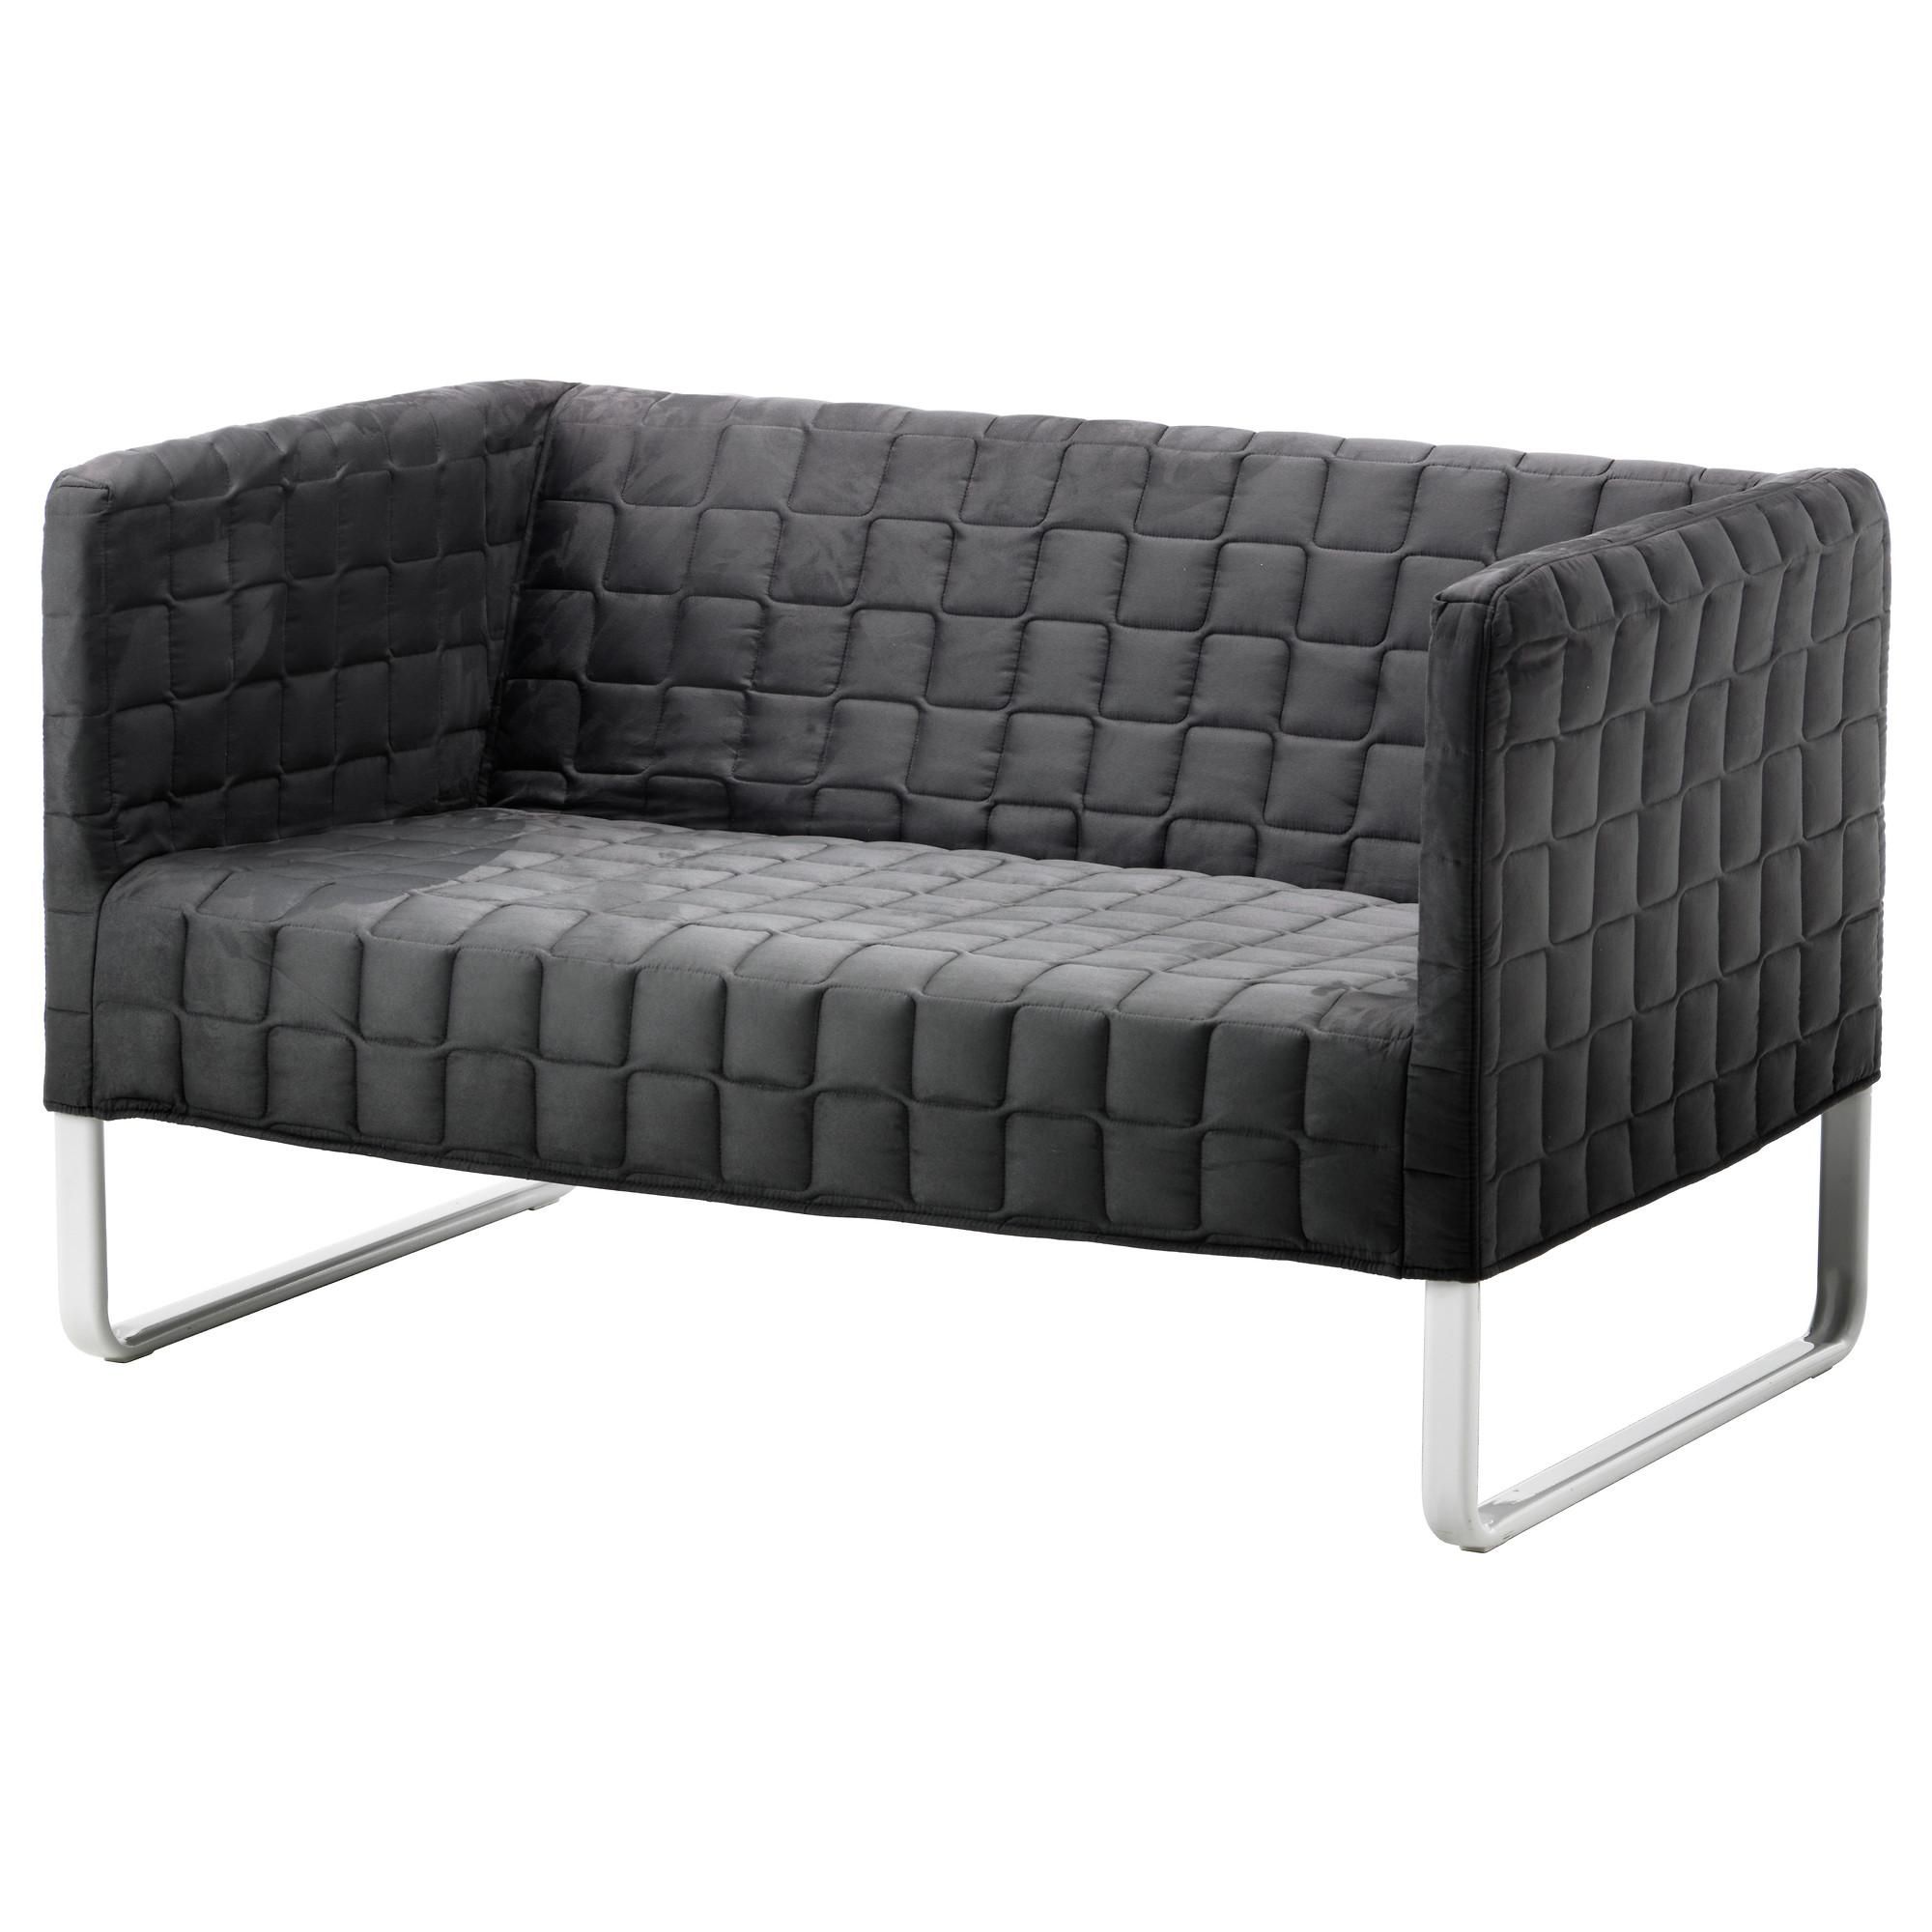 Knopparp 2 Seat Sofa Grey – Ikea Intended For Small 2 Seater Sofas (View 3 of 20)